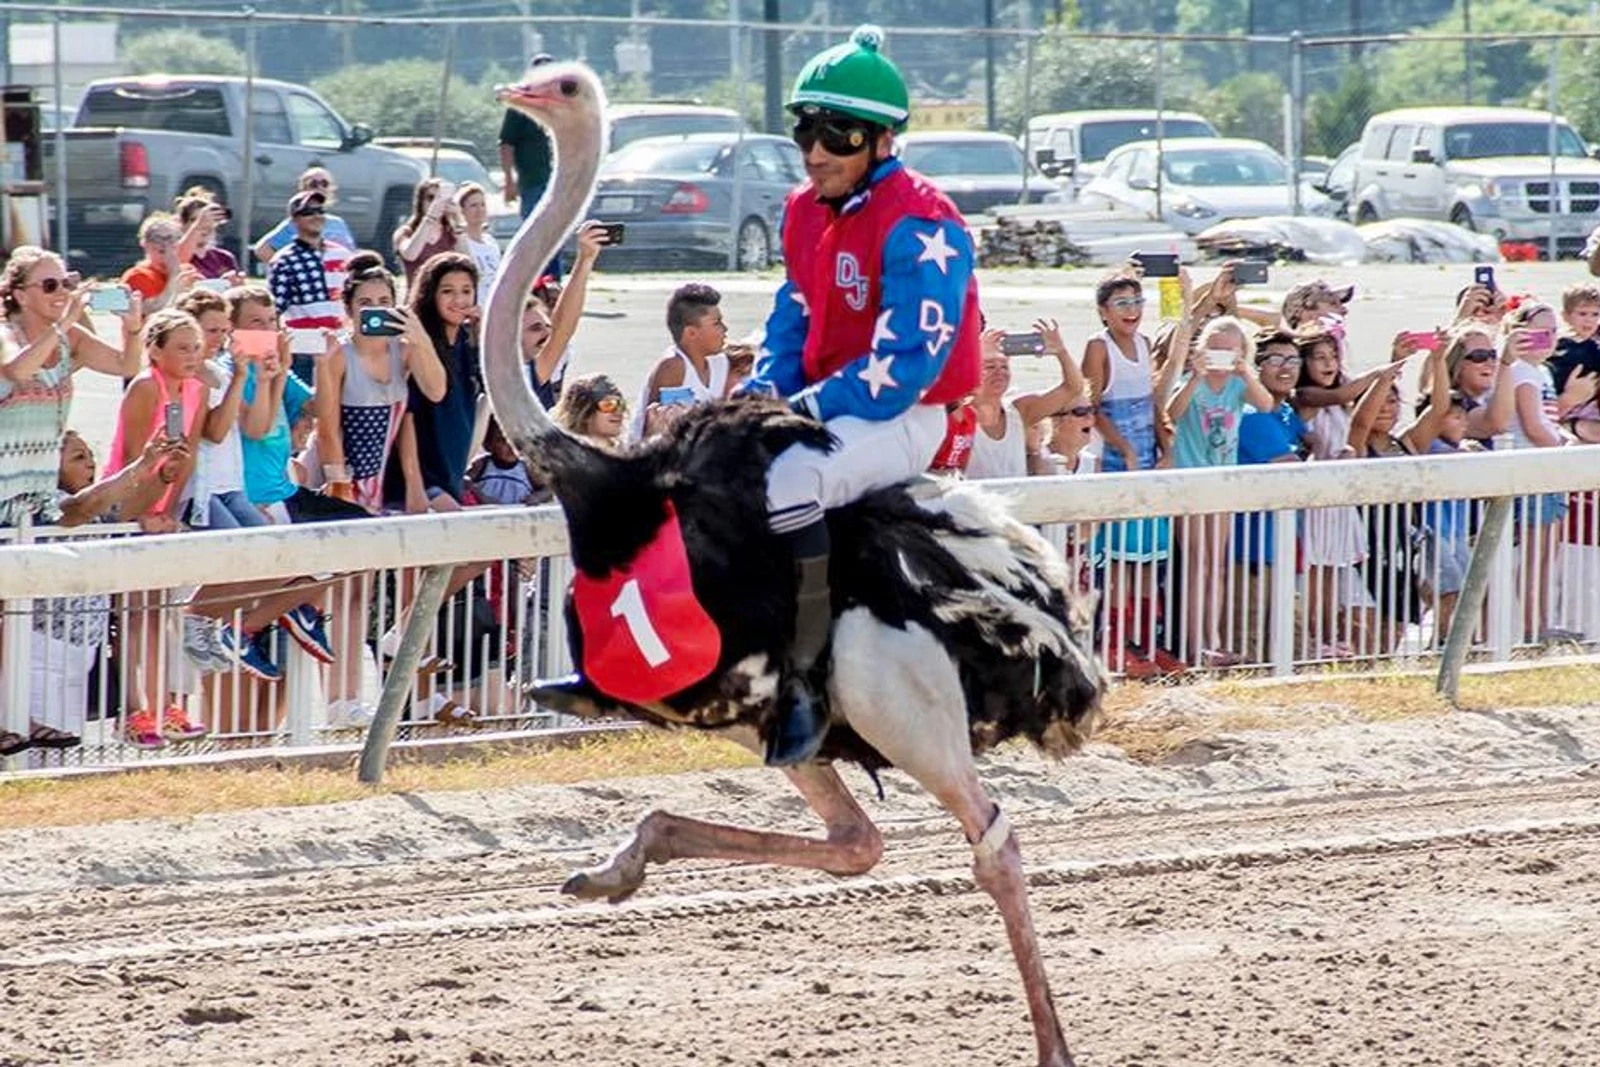 ostriches racing